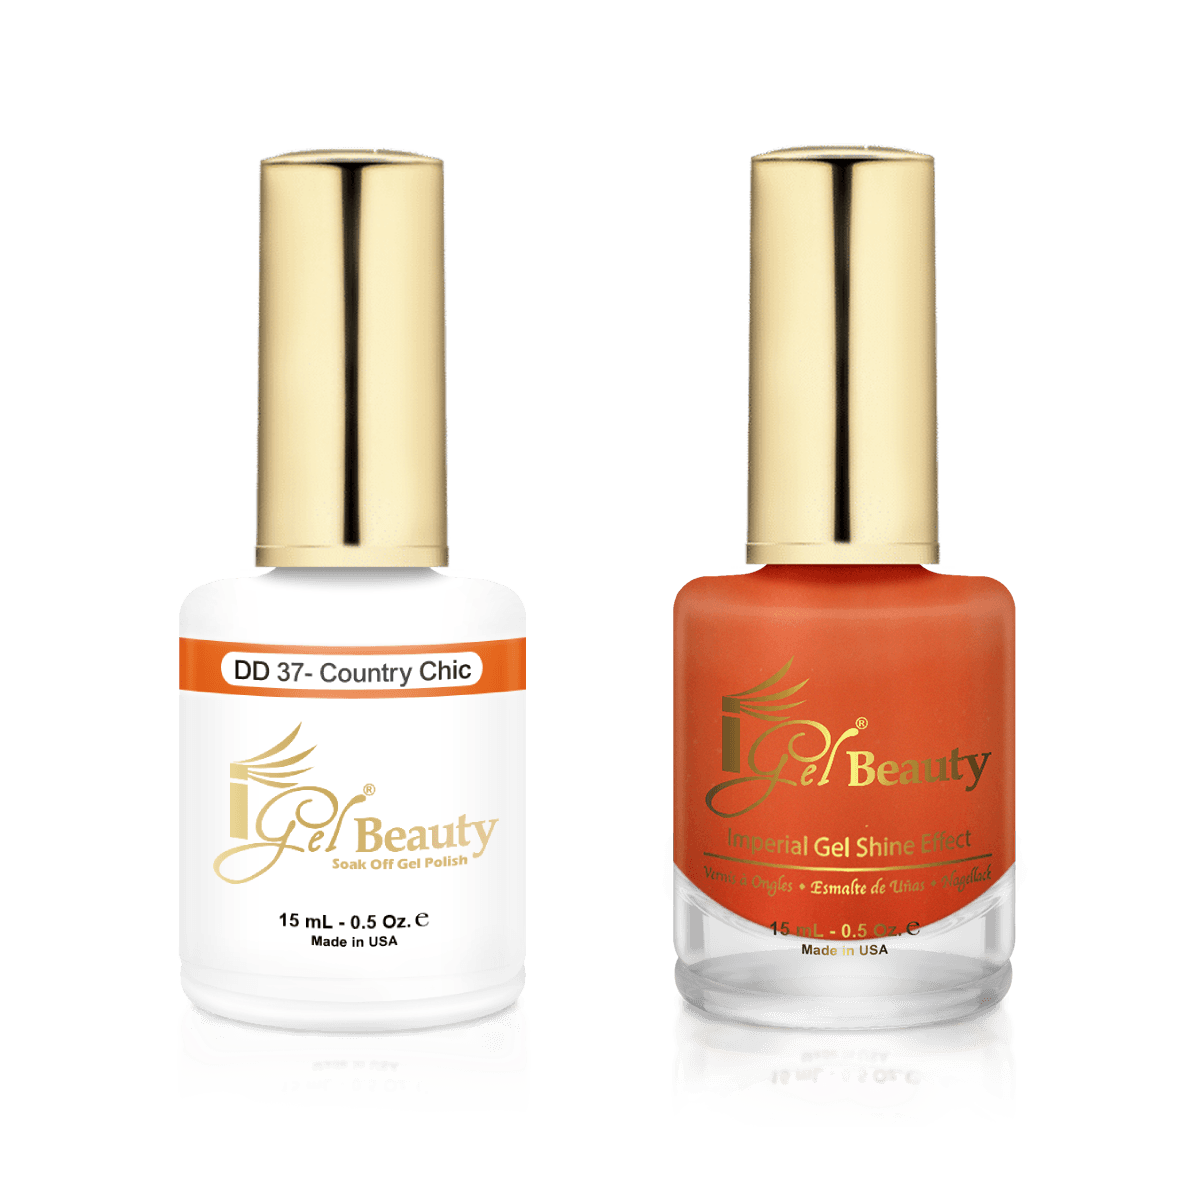 IGel Duo Gel Polish + Matching Nail Lacquer DD 37 COUNTRY CHIC